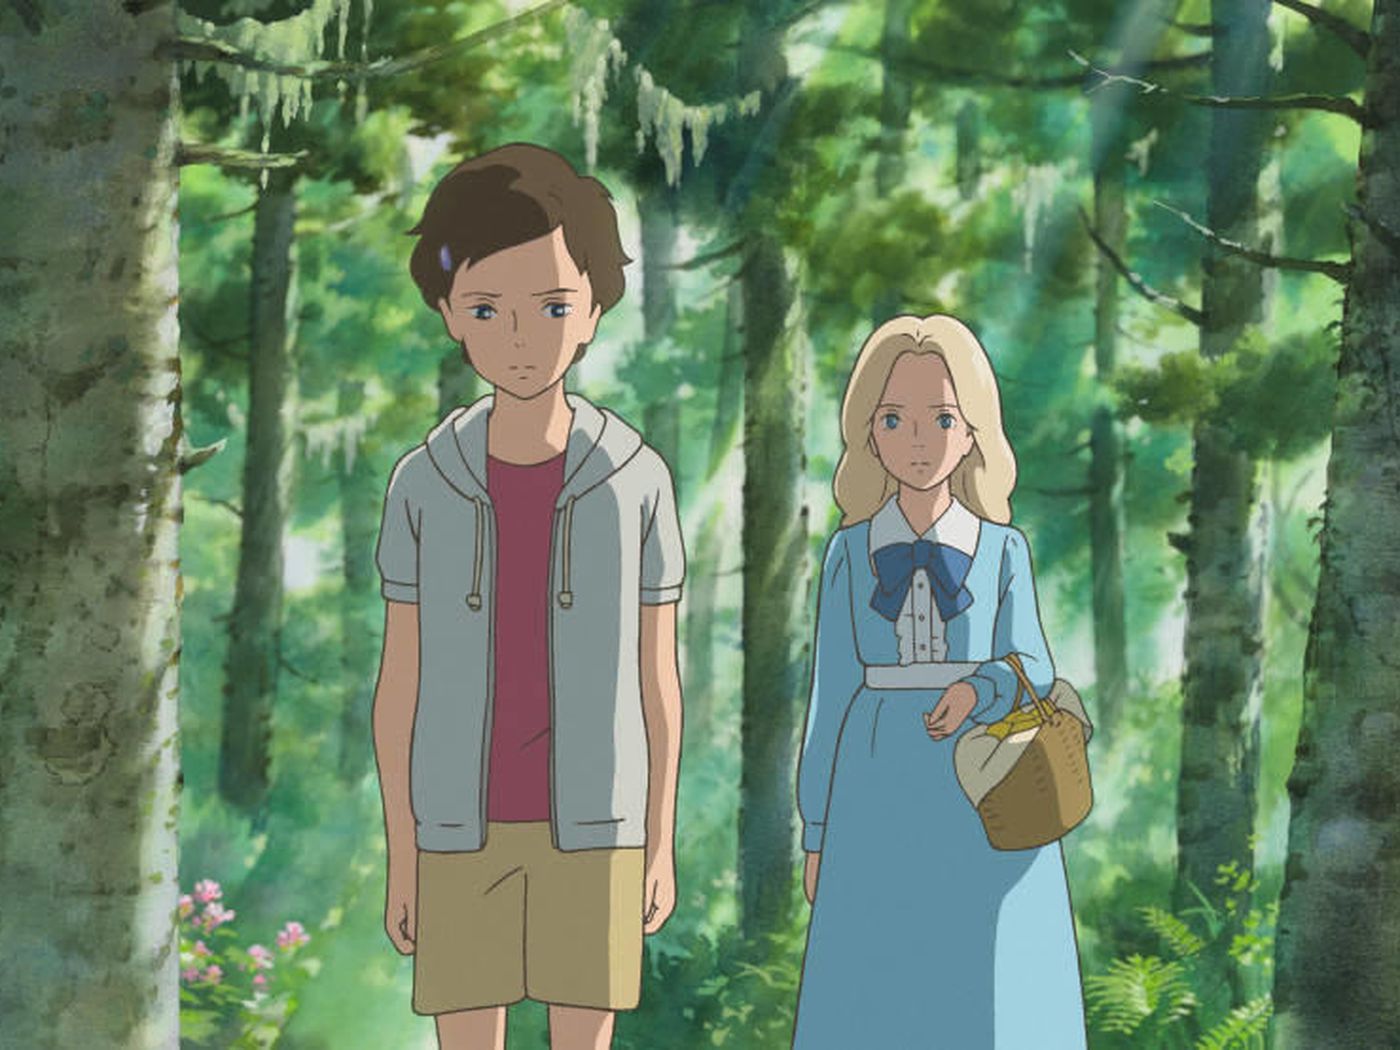 Cultures collide in mysterious 'When Marnie Was There'